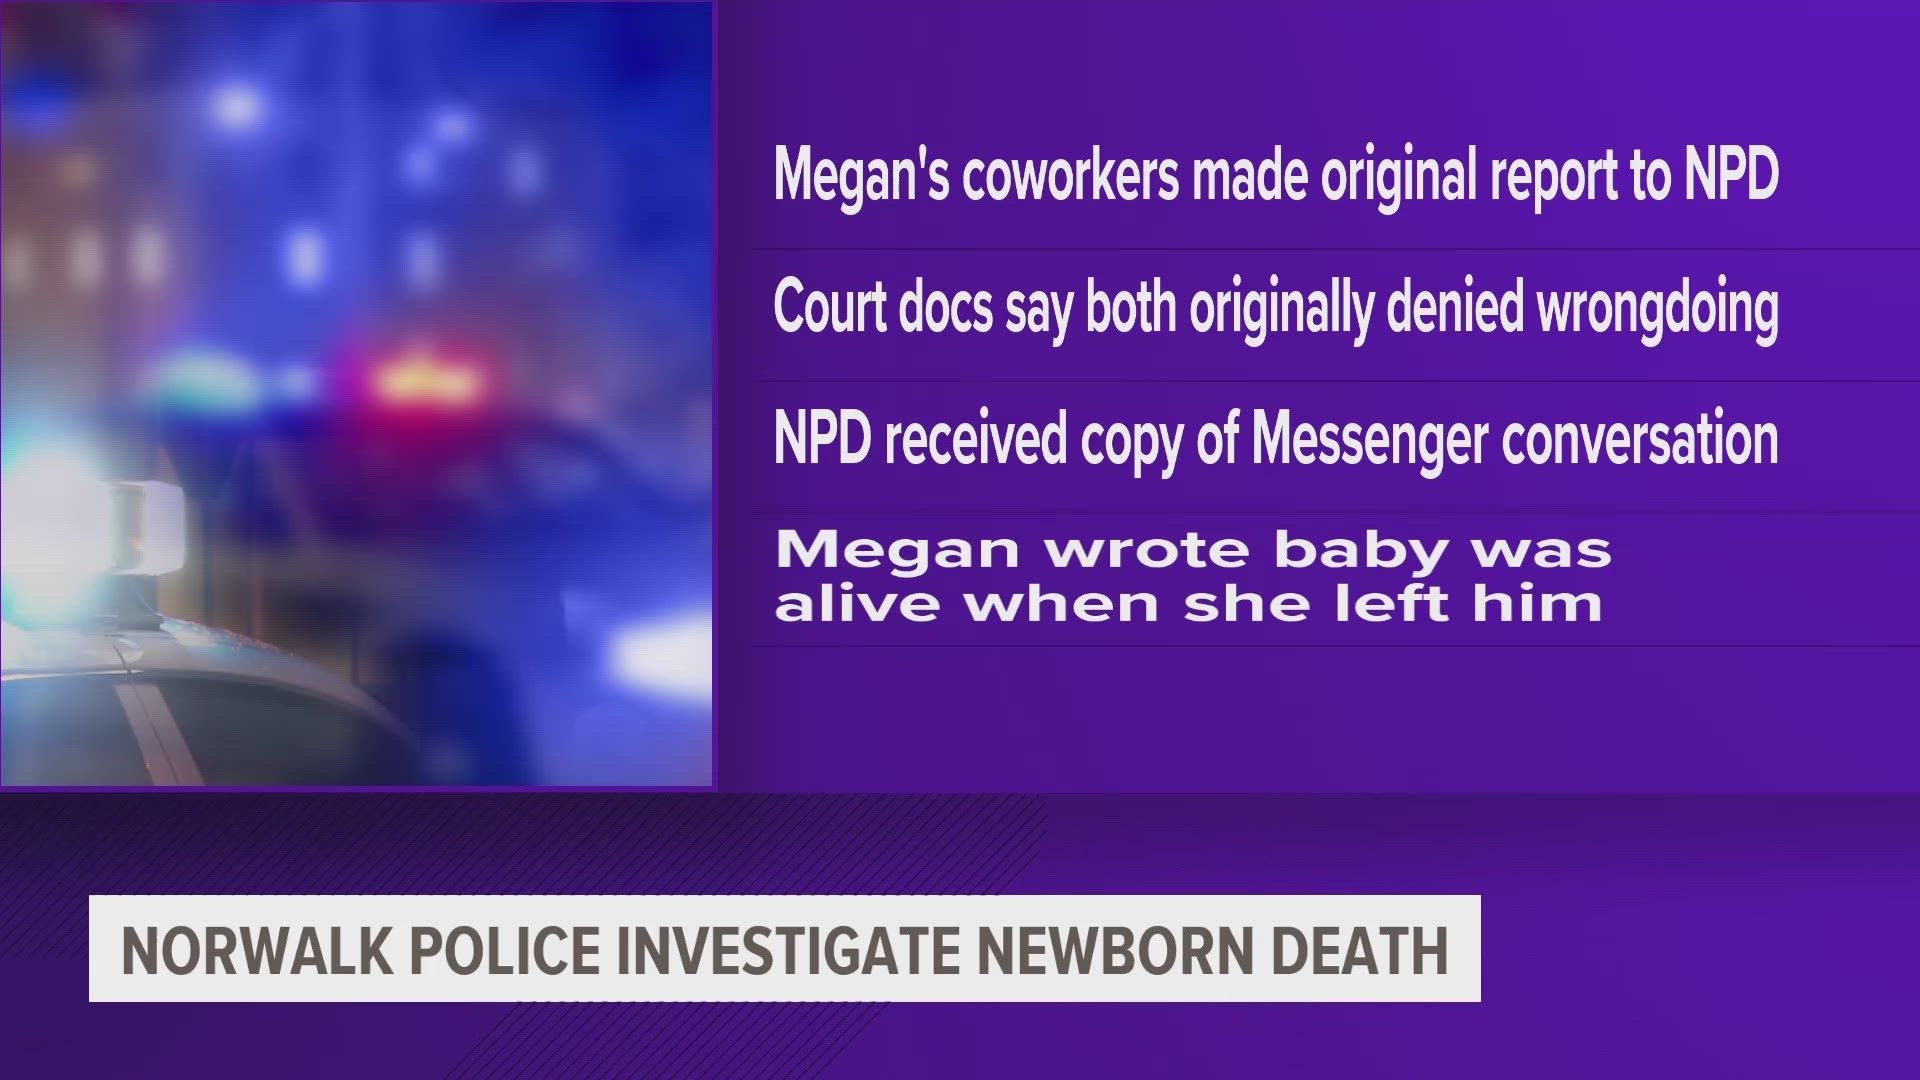 Police believe 25-year-old Megan K. Staude gave birth to a baby in late February before she and her father, 64-year-old Rodney Staude, allegedly left baby to die.